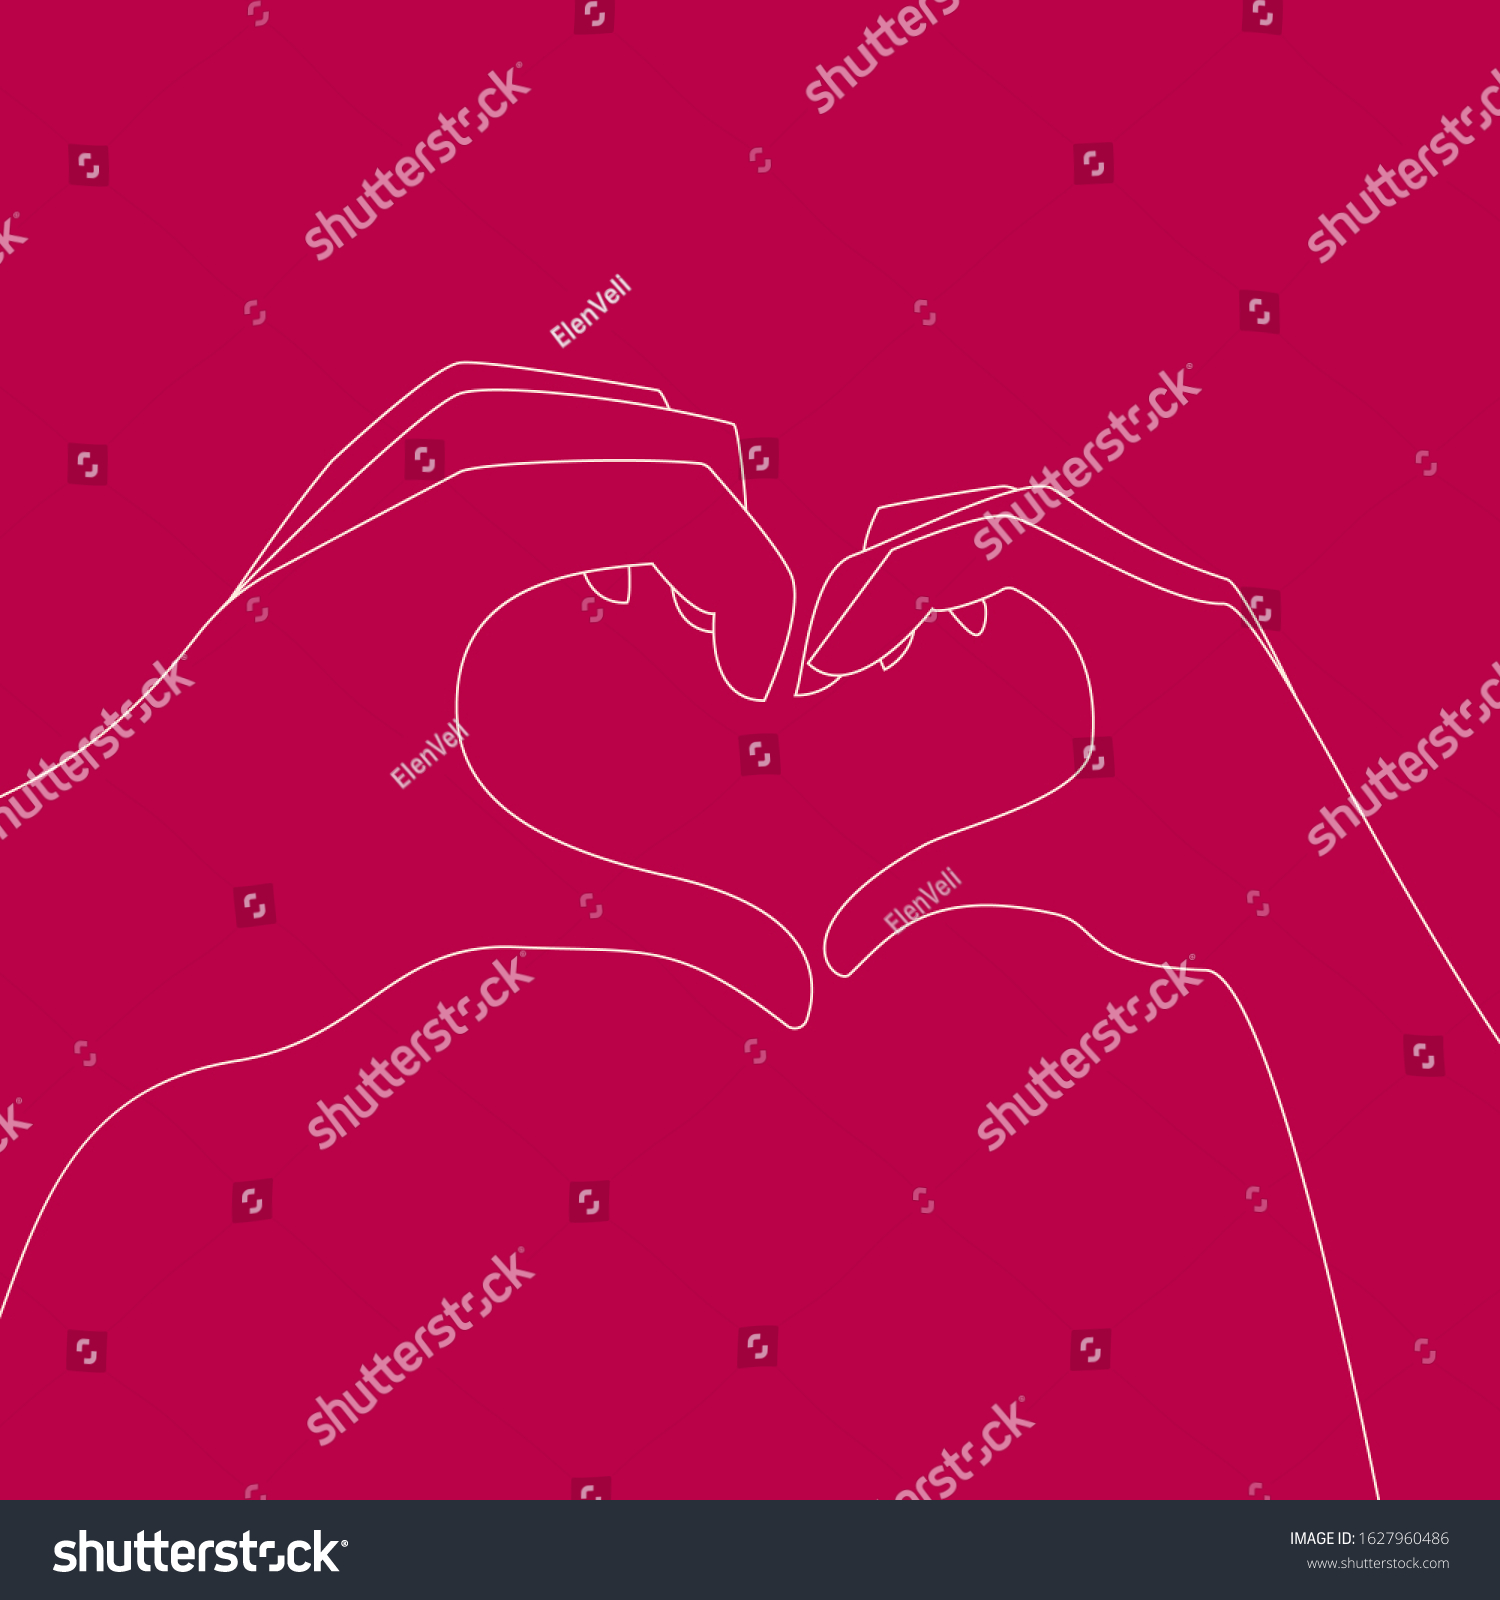 Two Hands Making Heart Shape On Stock Vector Royalty Free 1627960486 Shutterstock 